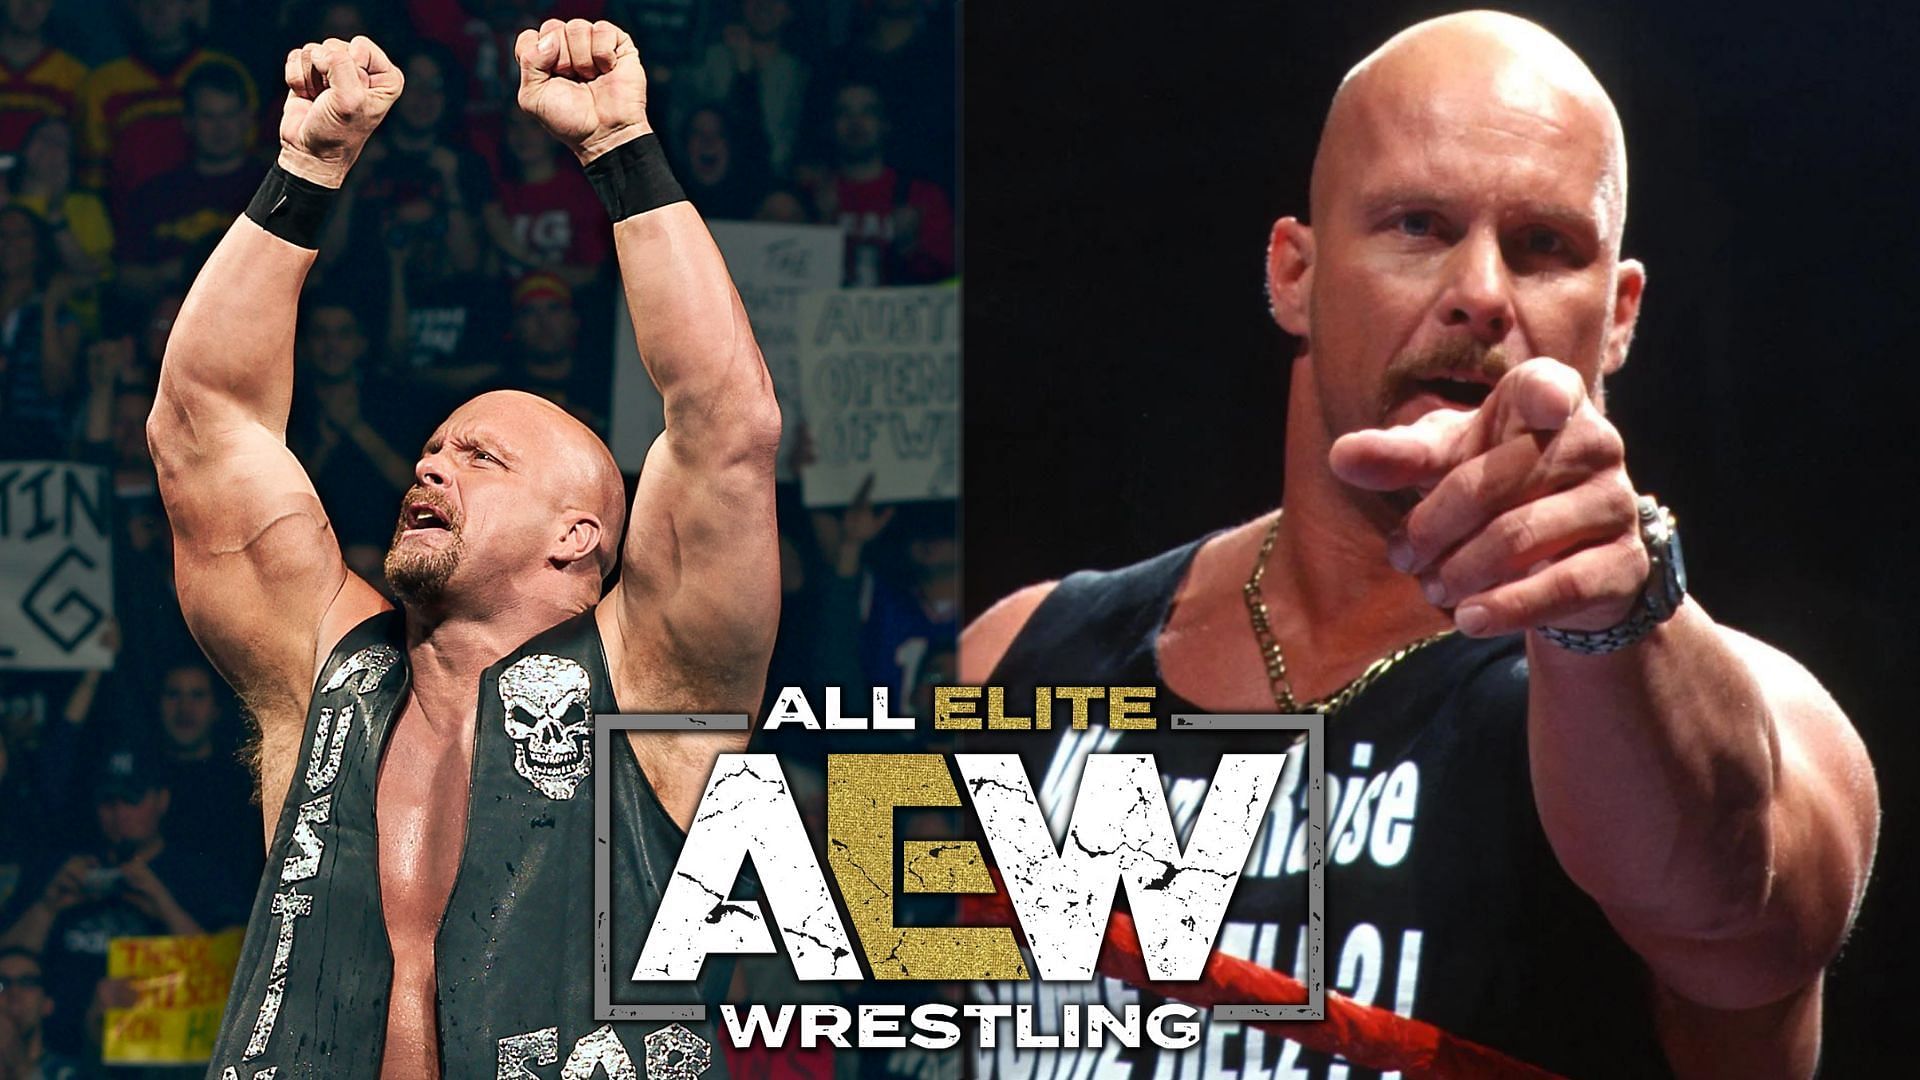 Could these stars have the same effect as Stone Cold had on the wrestling industry?